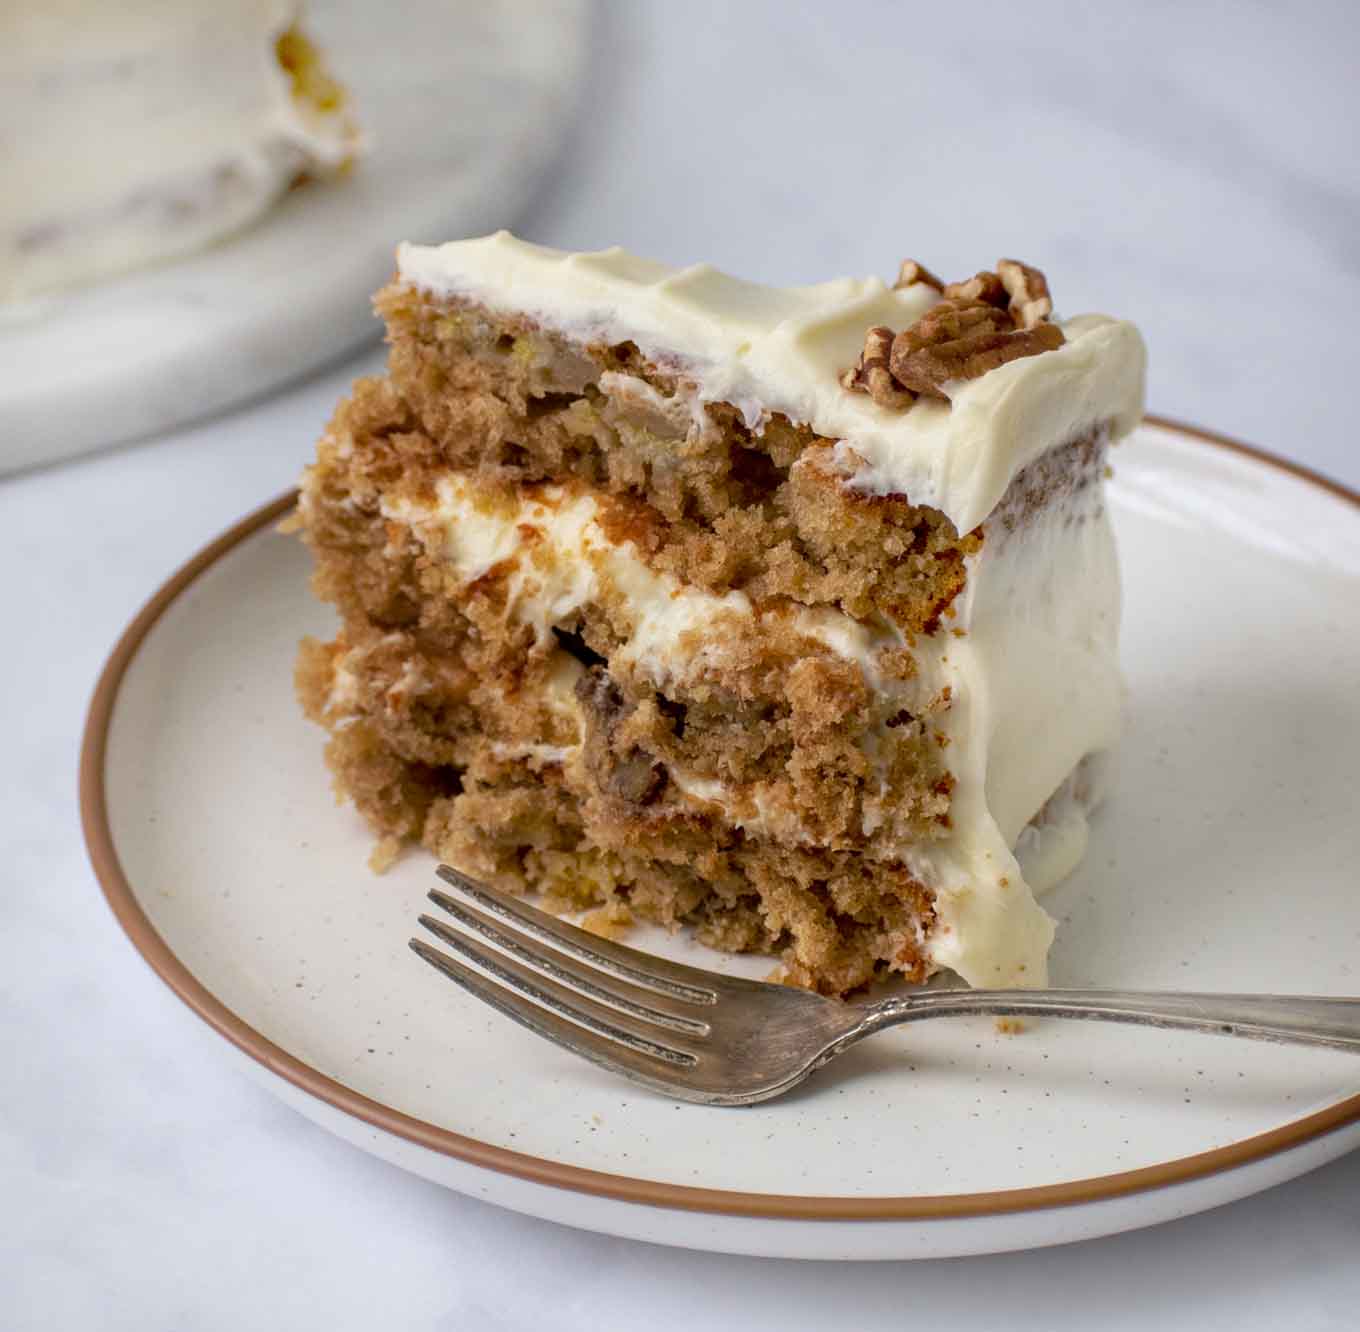 slice of hummingbird cake on a plate with a fork